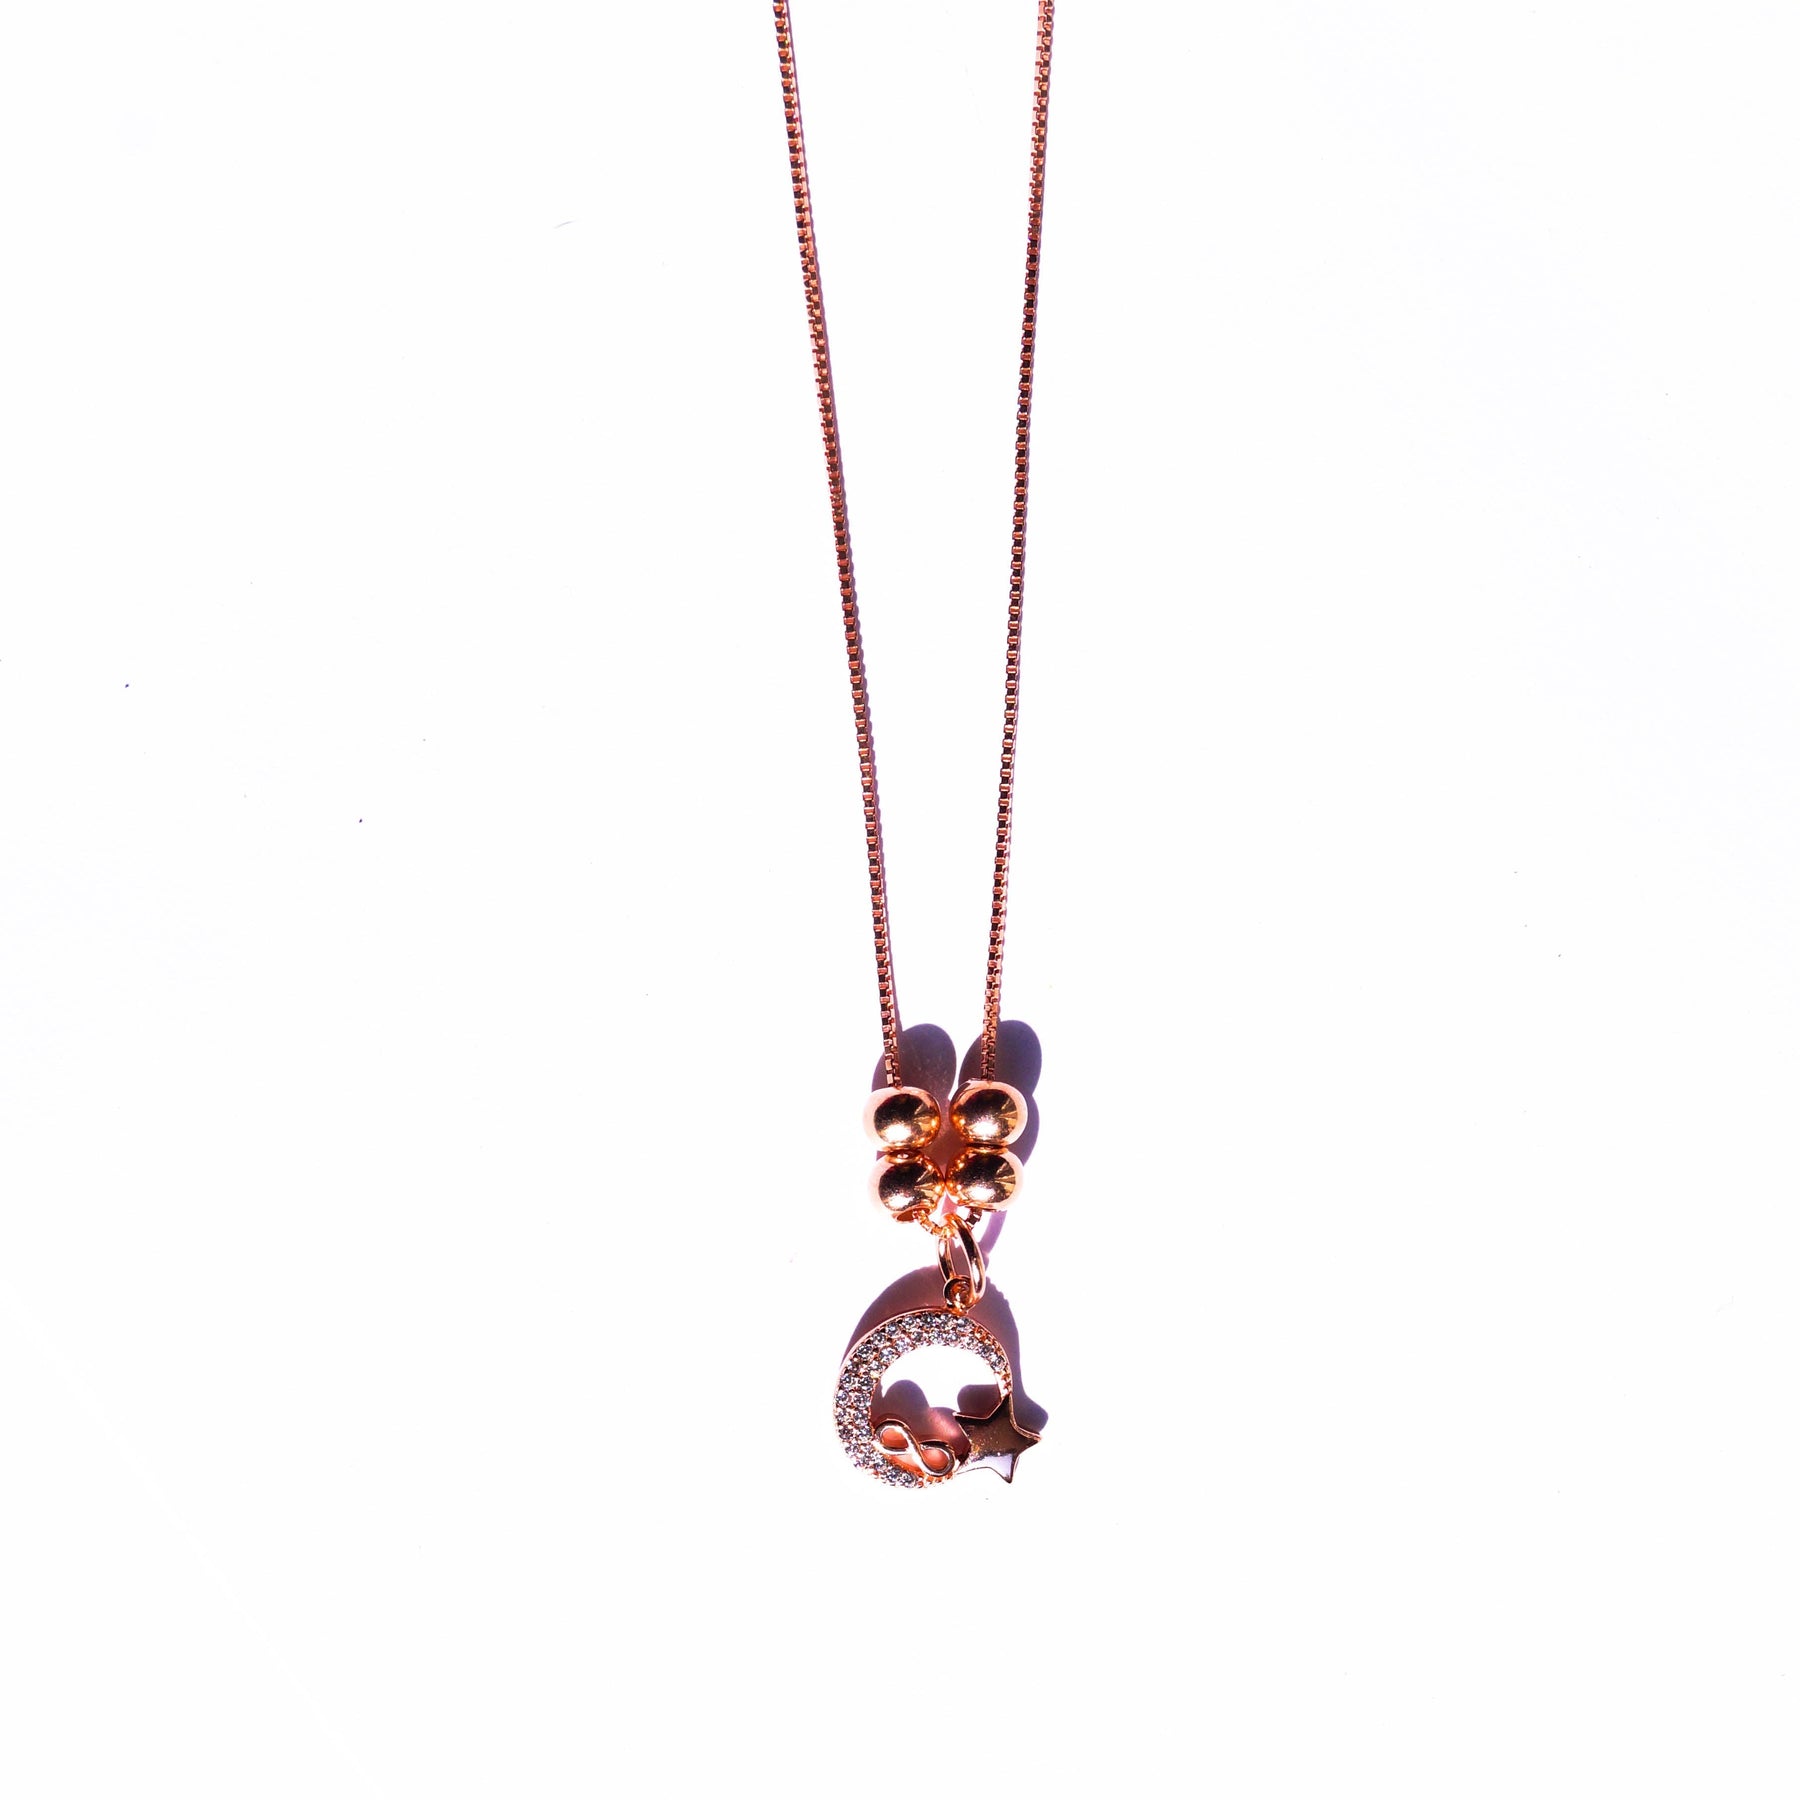 Studded Starry Infinity Pendant Chain